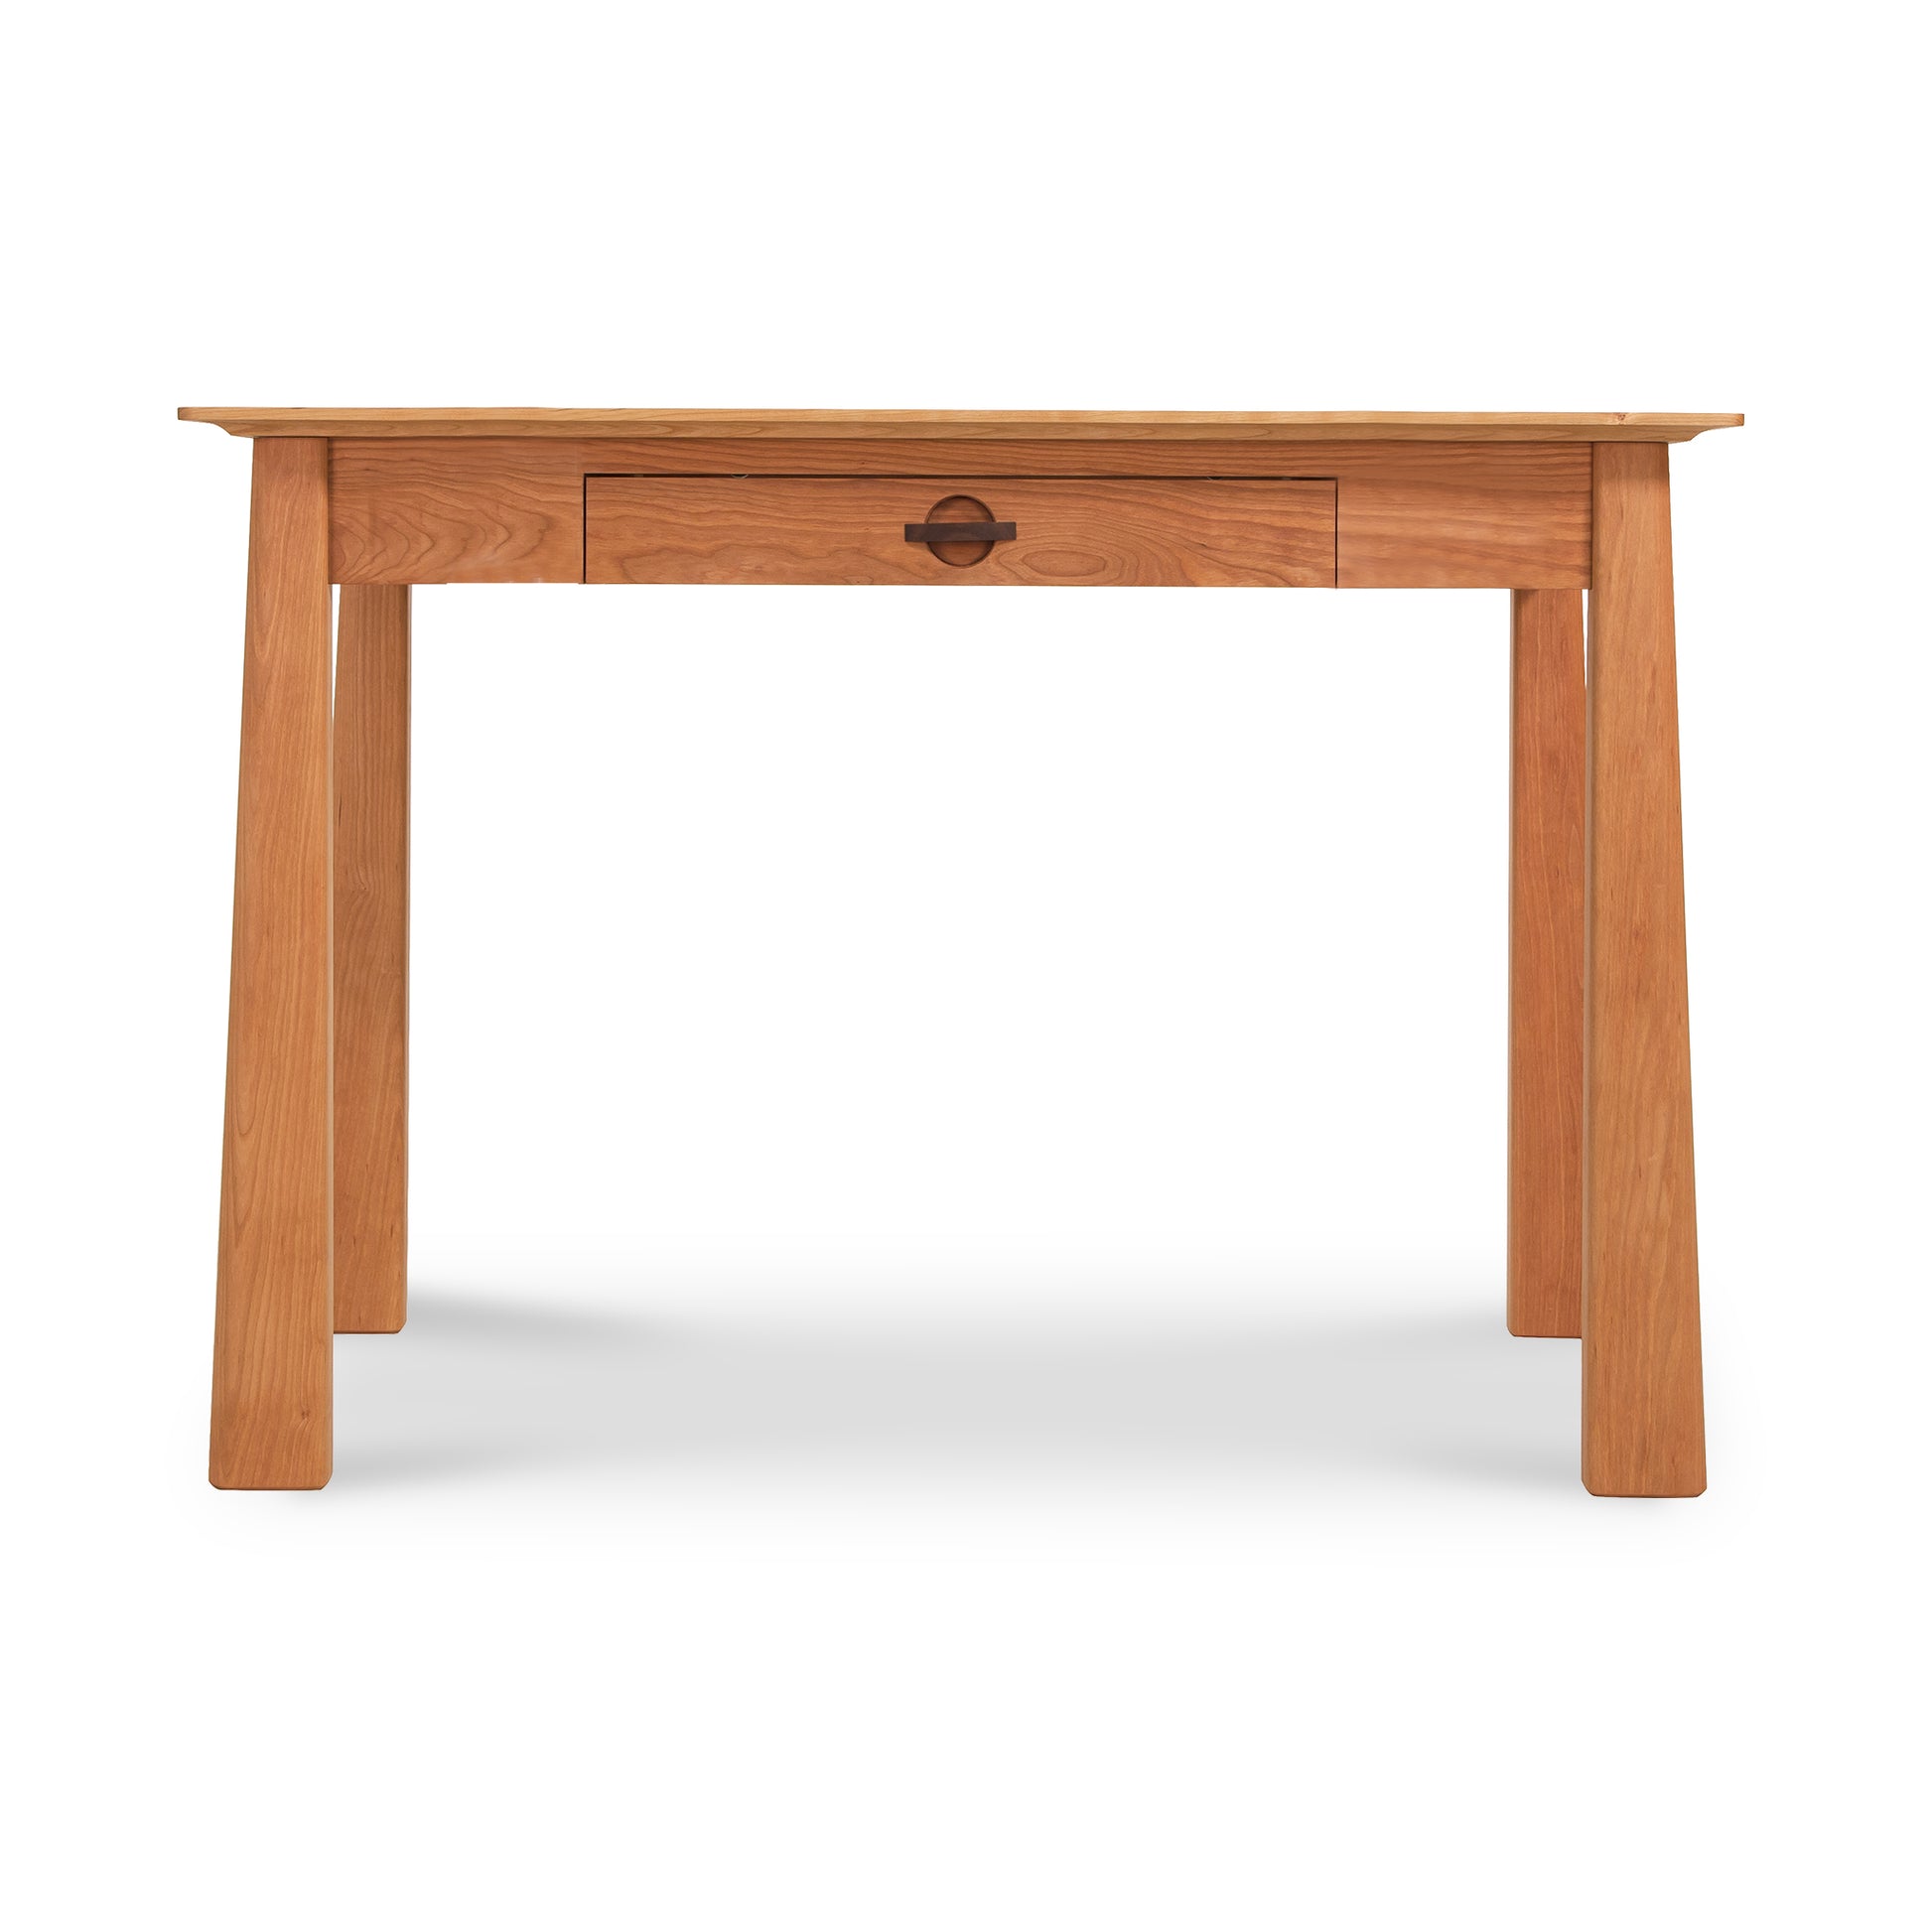 Maple Corner Woodworks Cherry Moon Writing Desk, a solid wood desk with a single centered drawer, displayed against a white background.